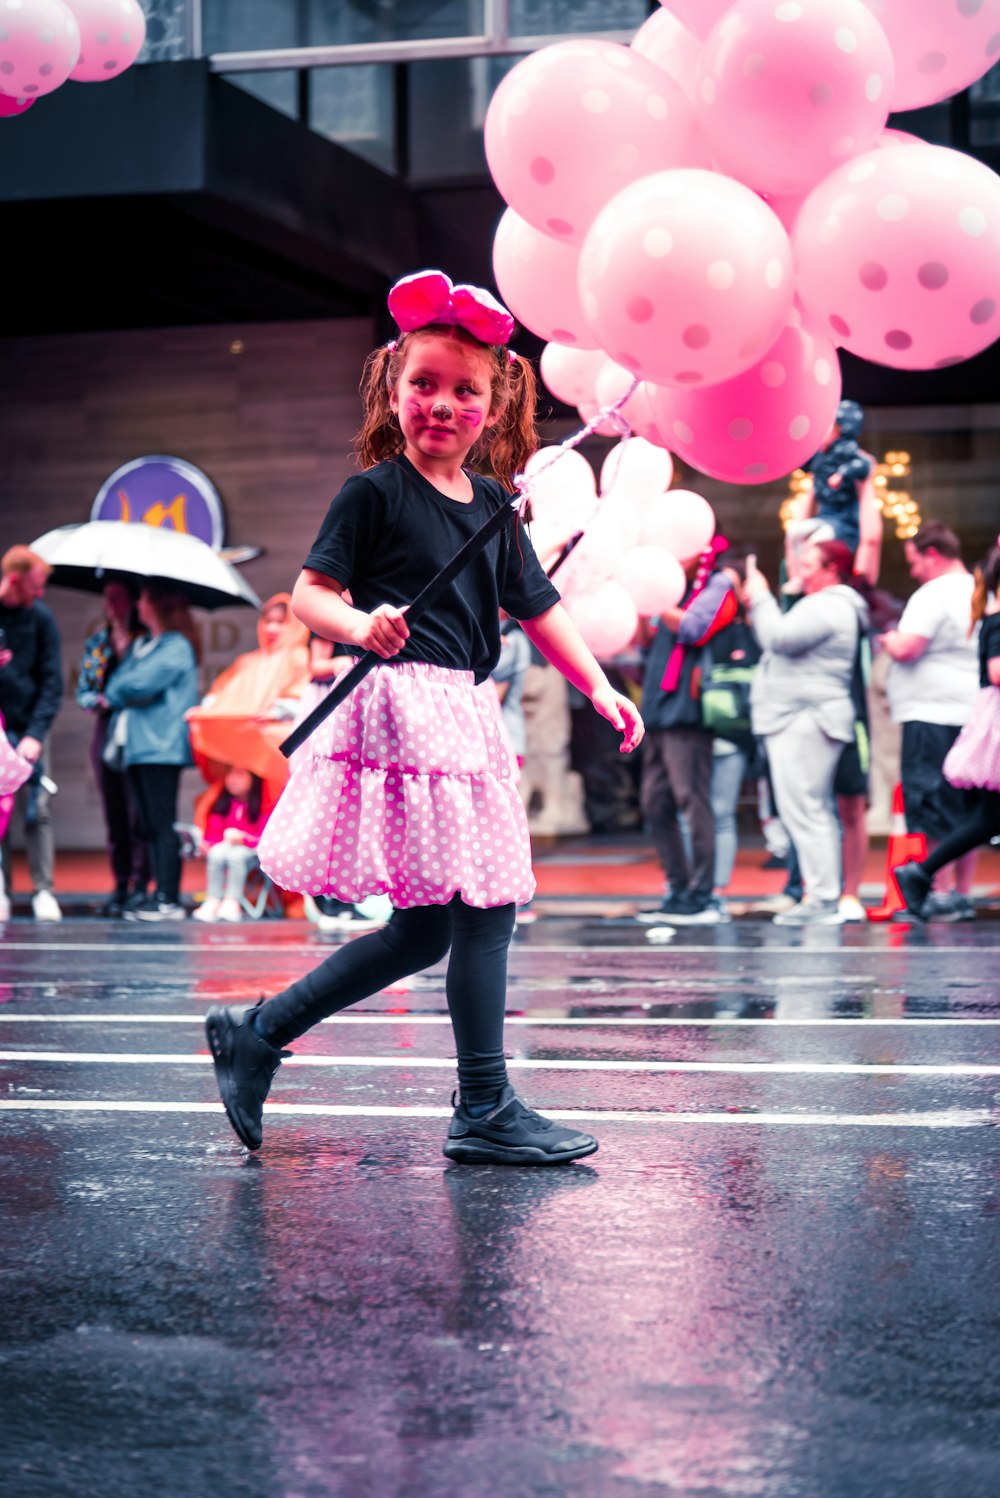 girl in black jacket and pink skirt with pink hat holding umbrella